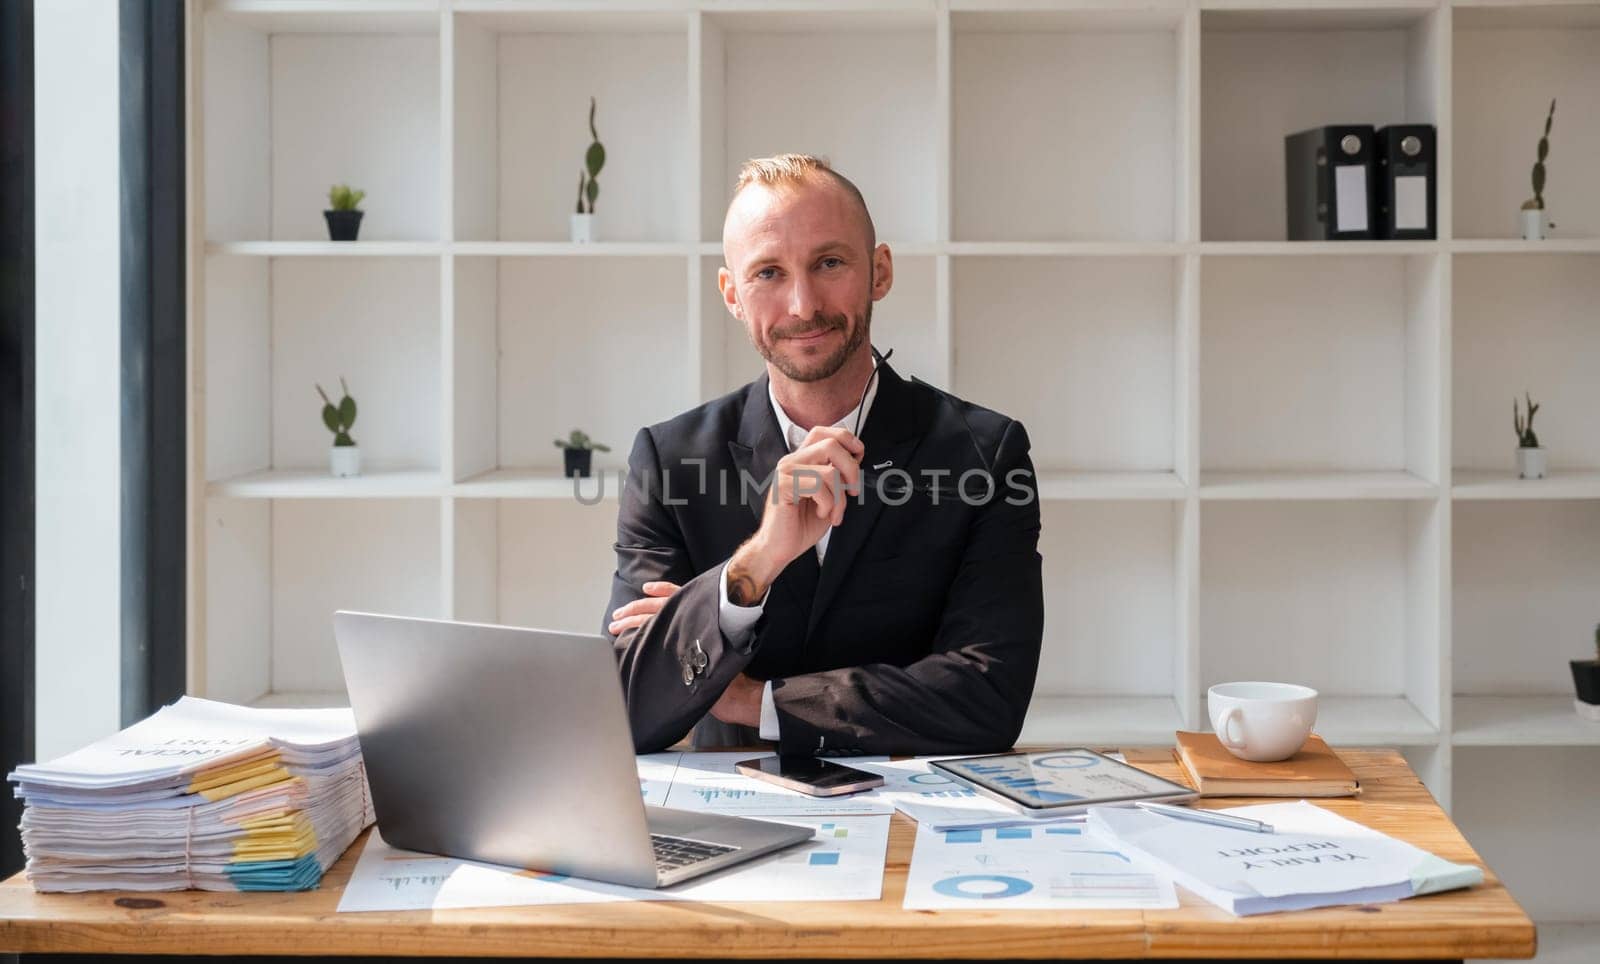 Portrait of attractive smiling young business man sitting in office and looking at camera.